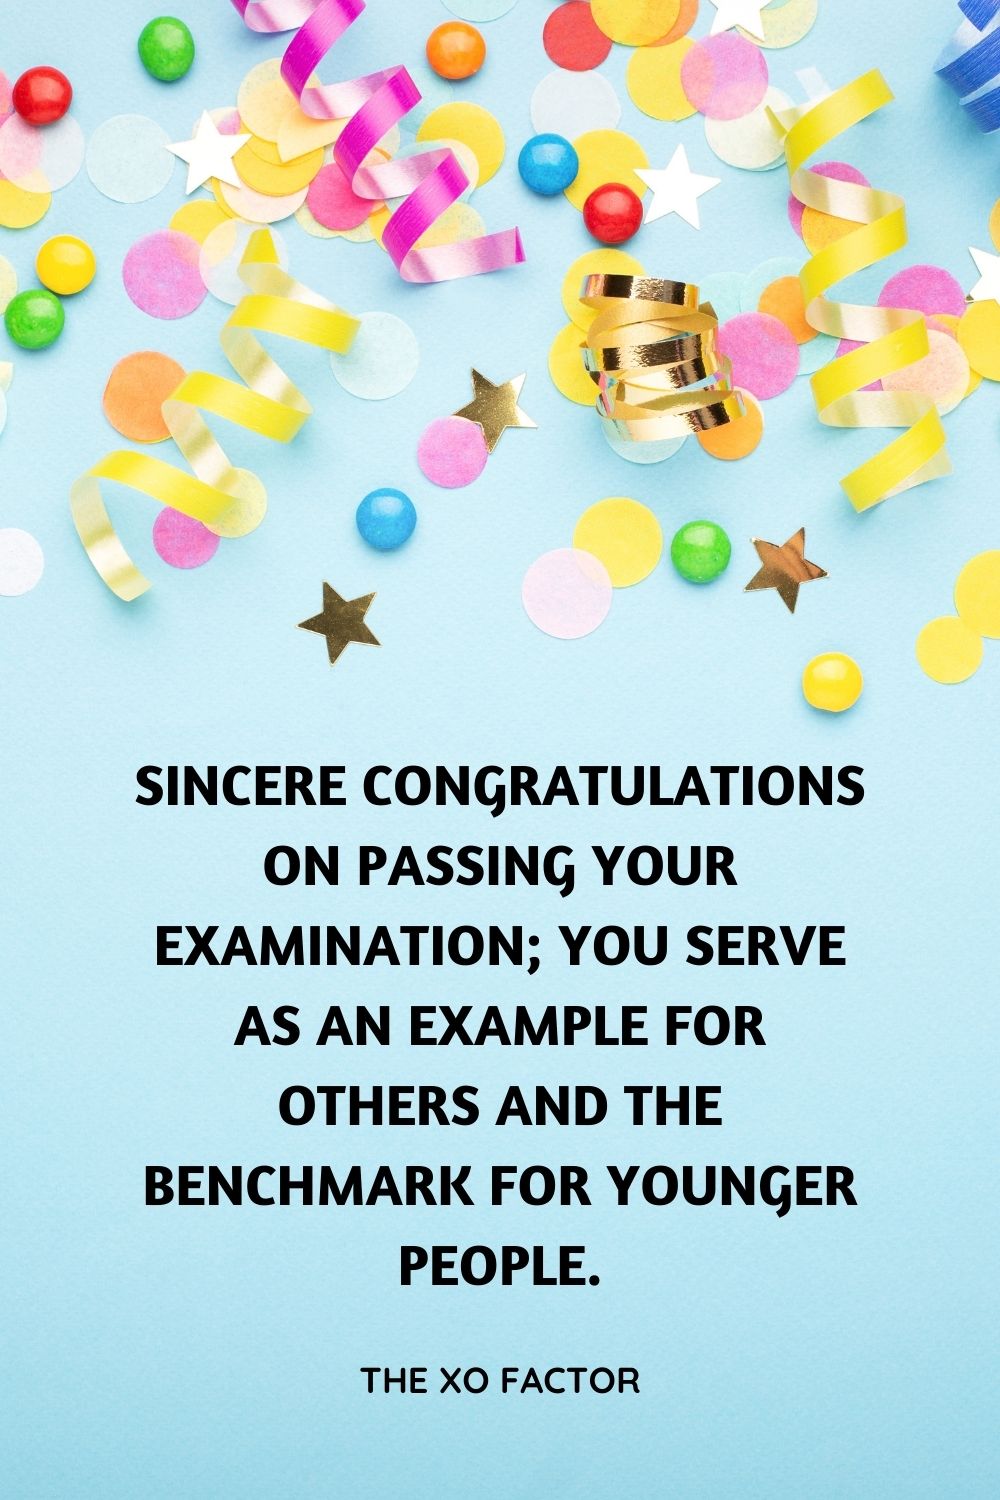 Sincere congratulations on passing your examination; You serve as an example for others and the benchmark for younger people.